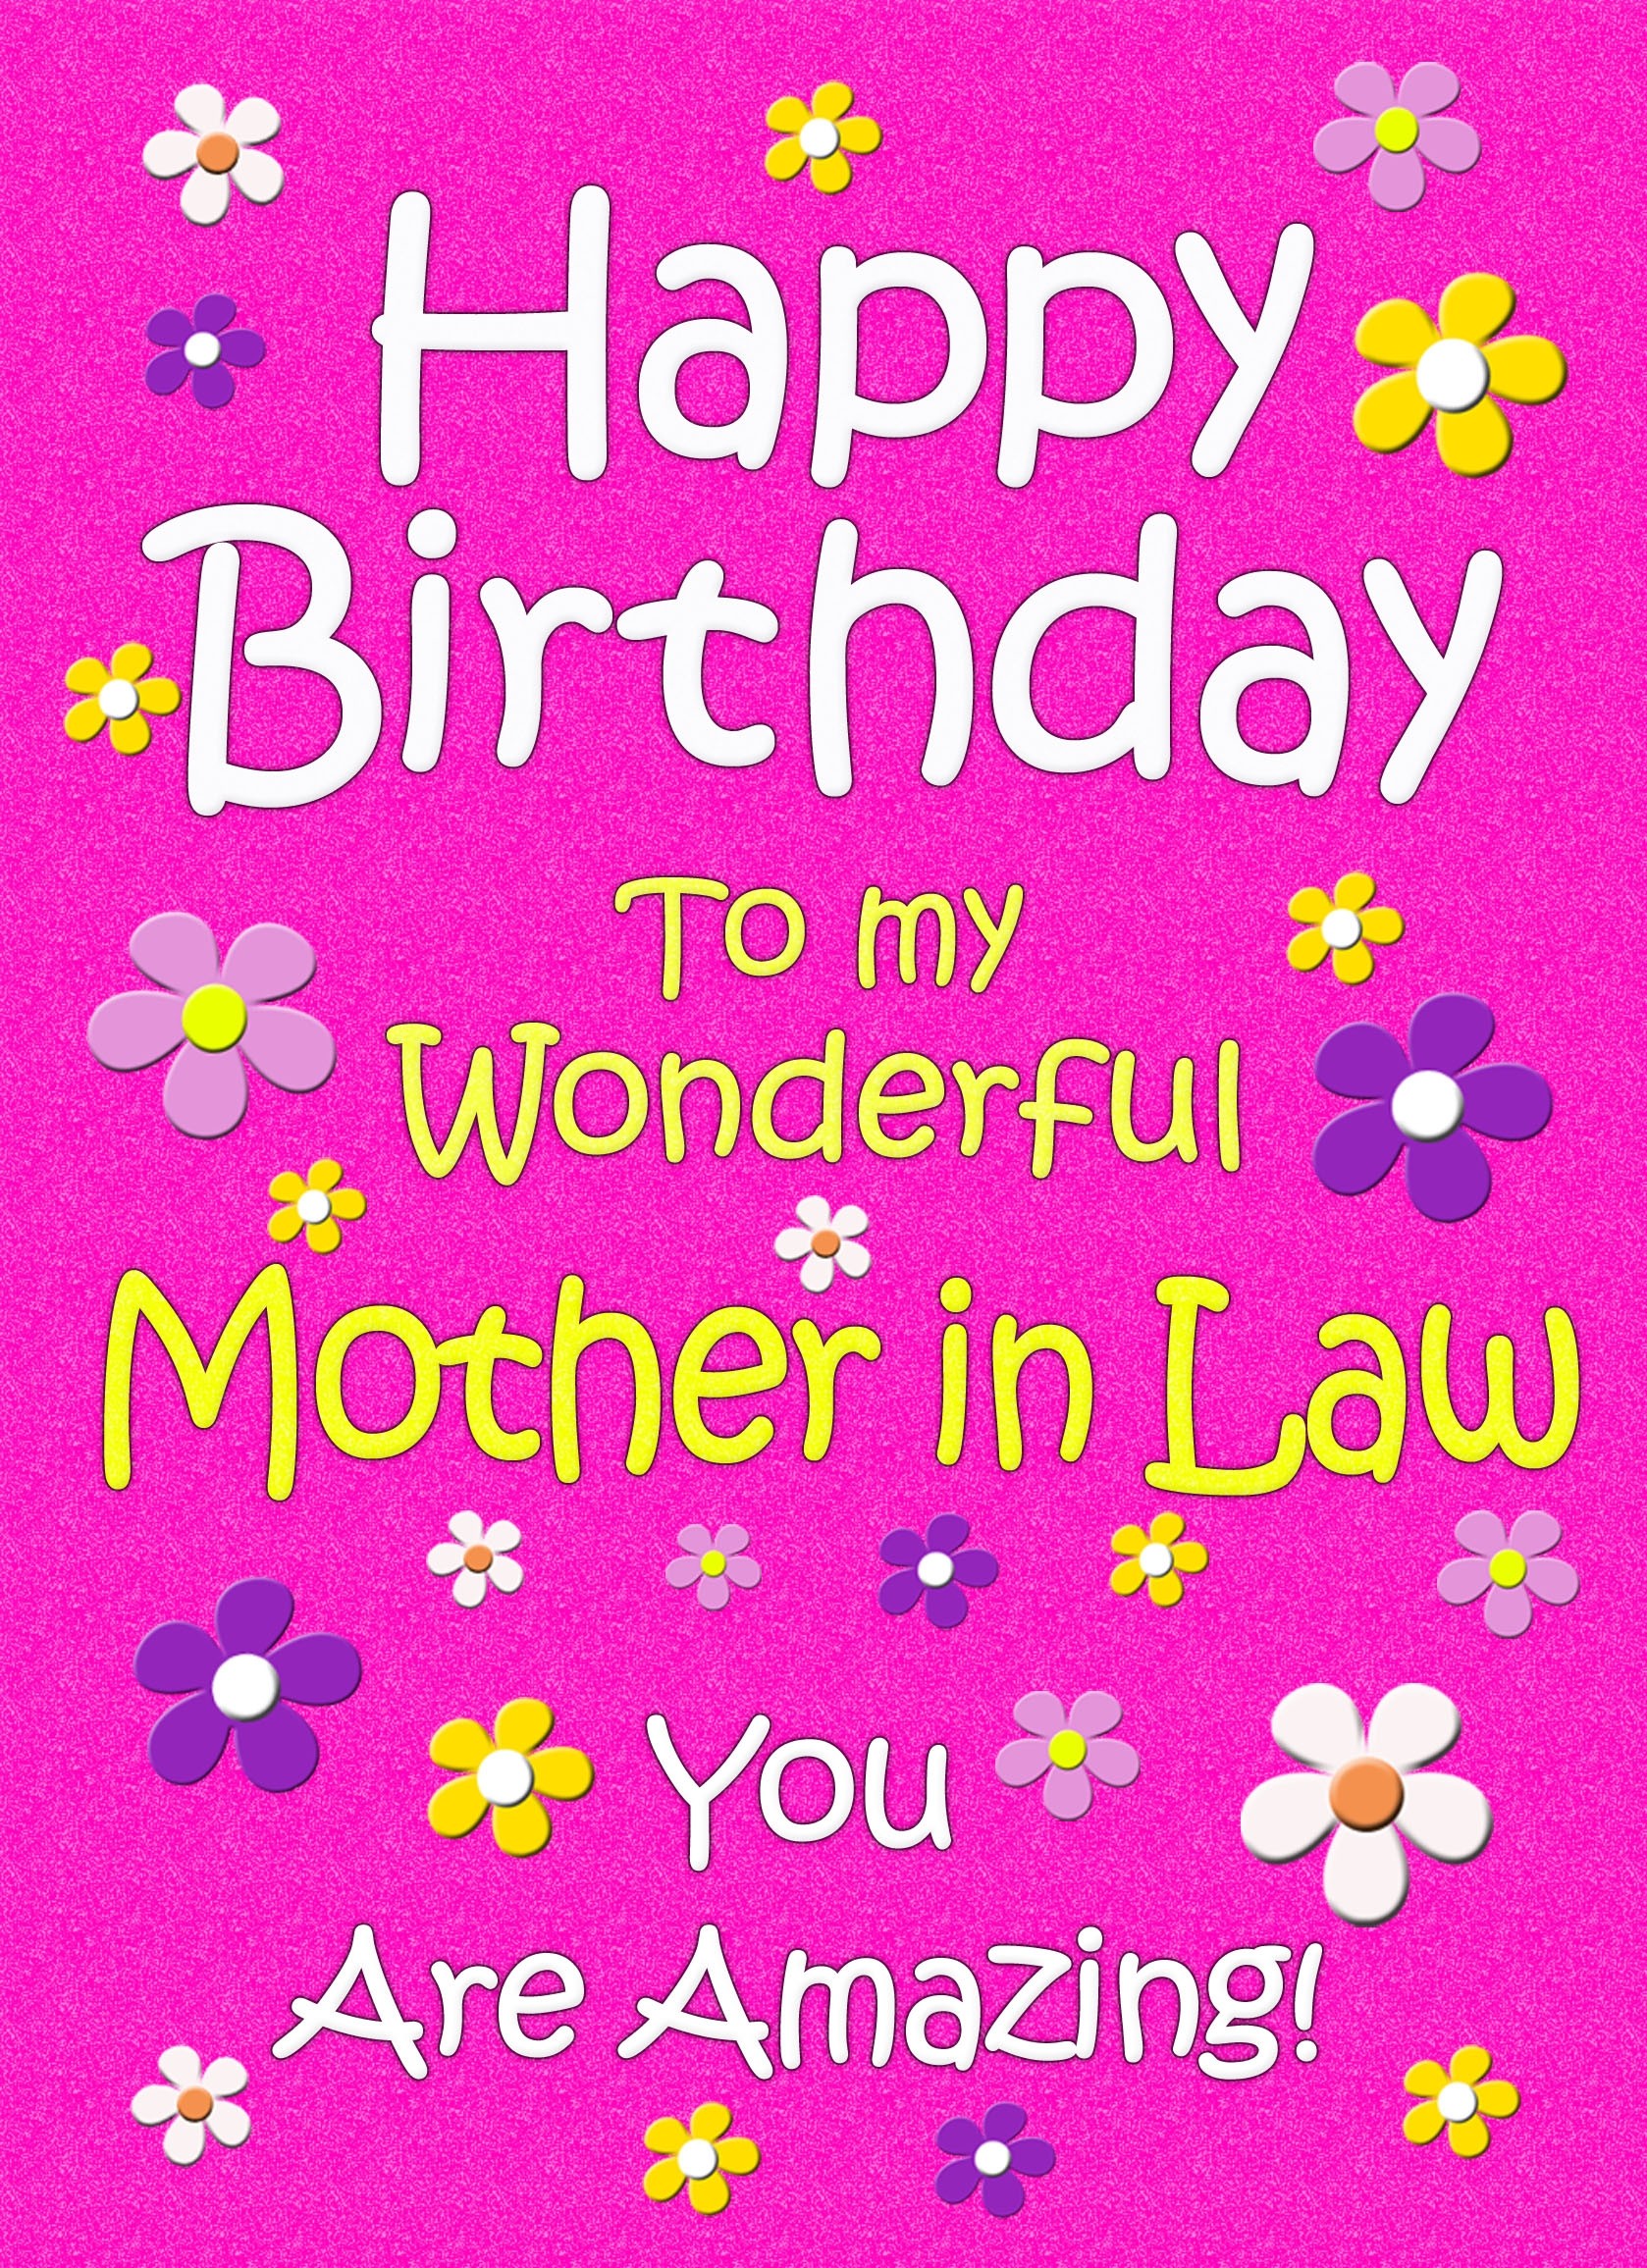 Mother in Law Birthday Card (Cerise)